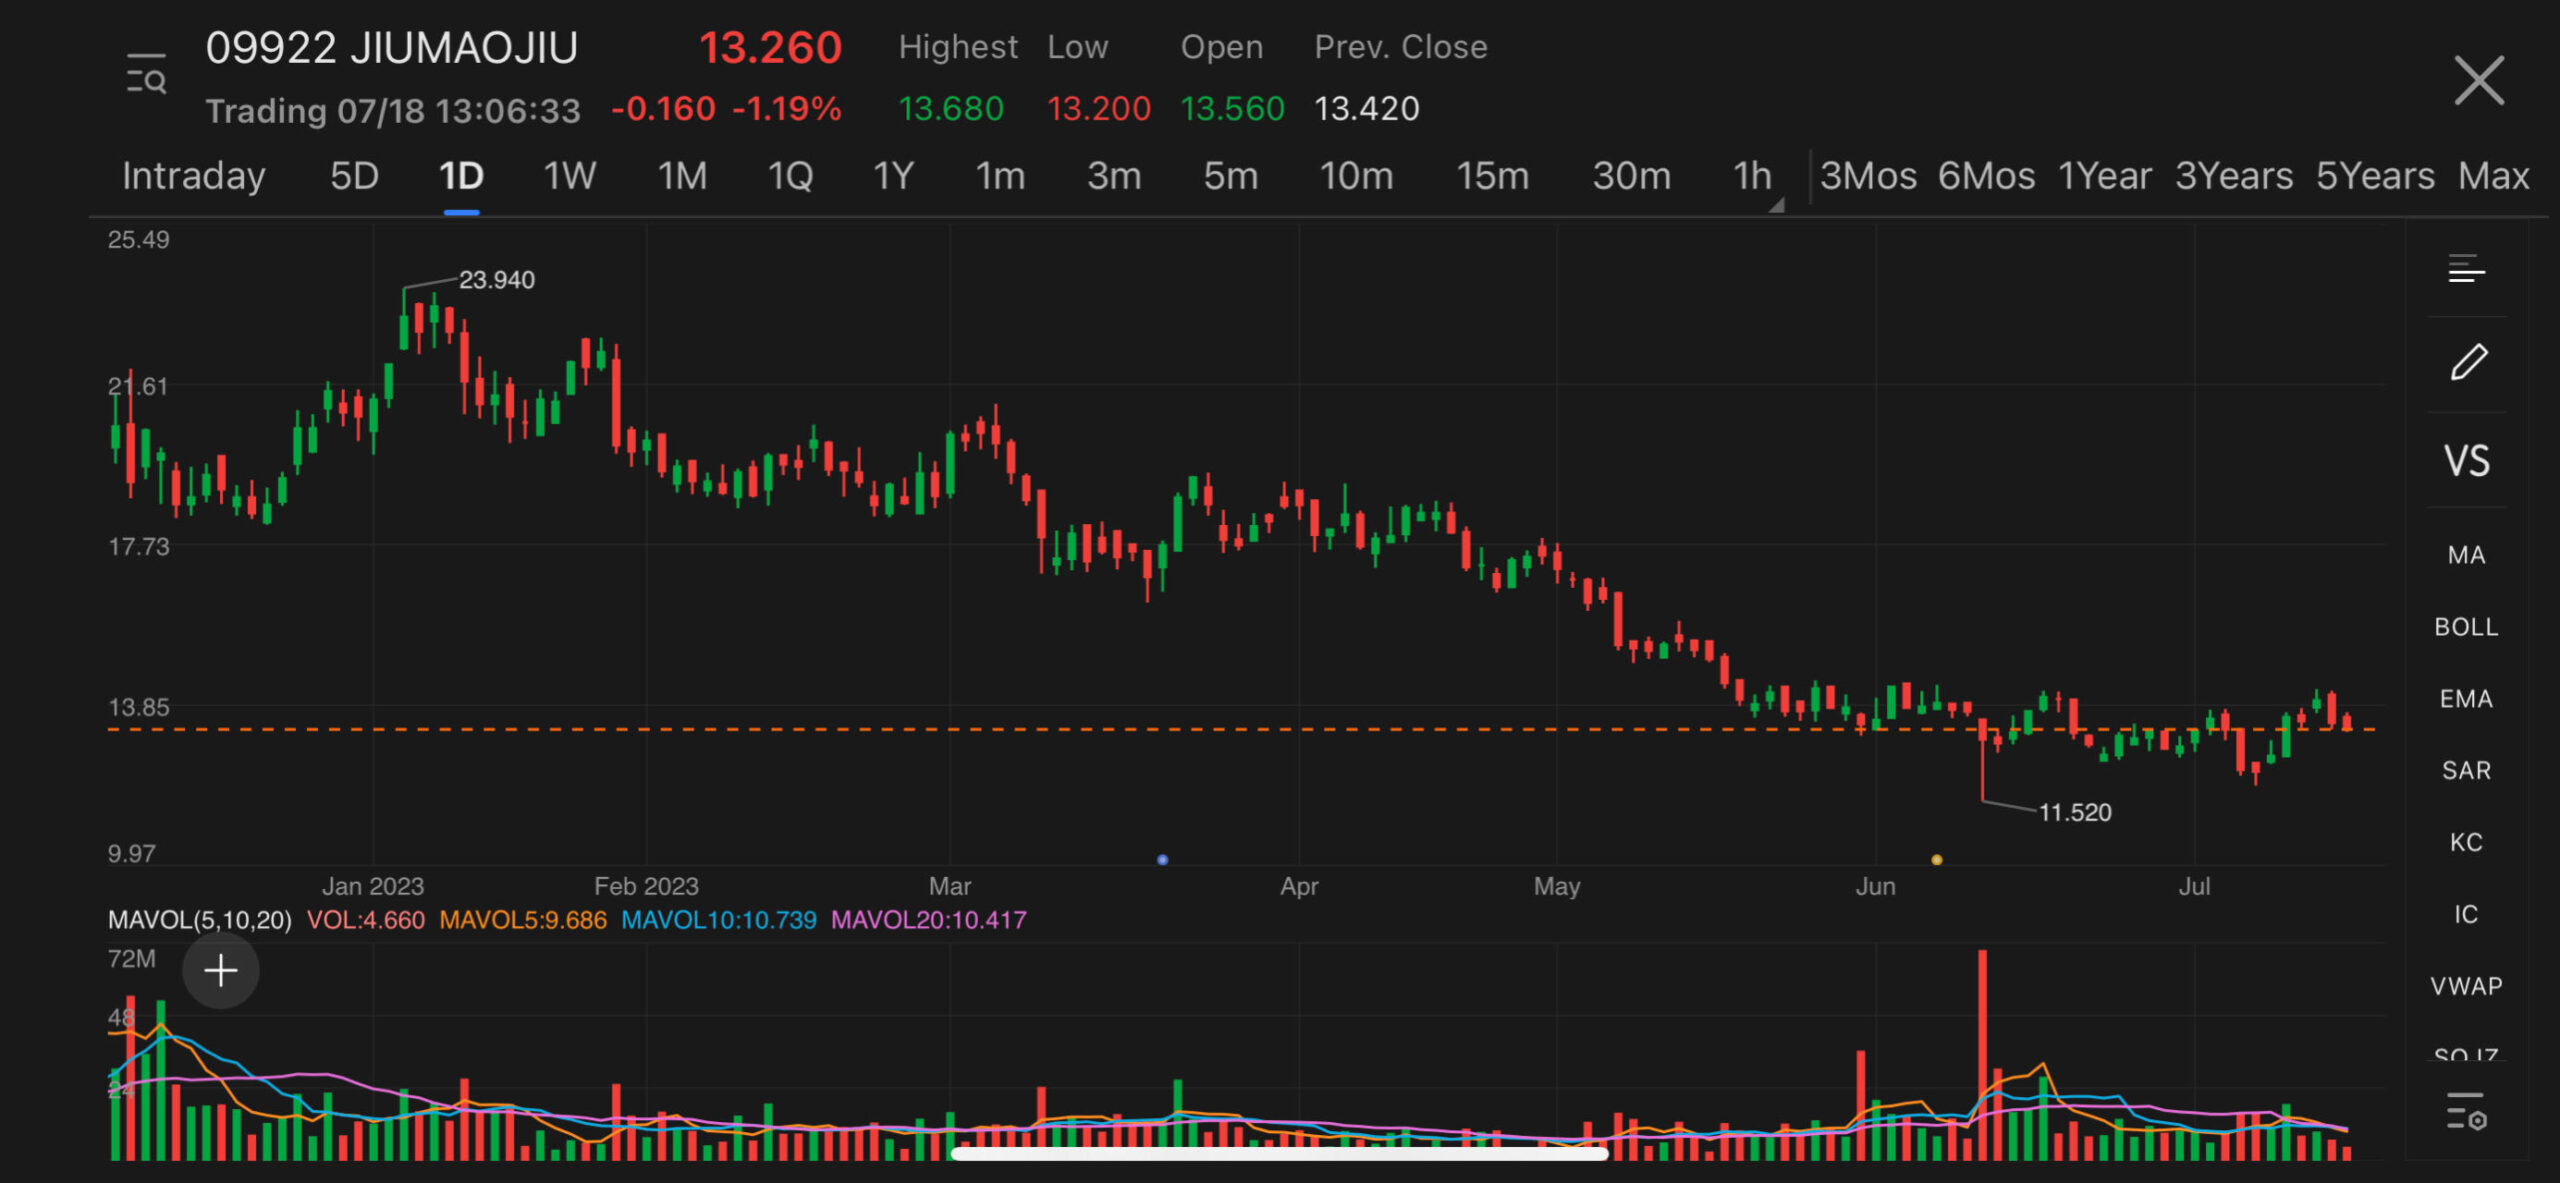 CICC lowers target price of restaurant chain Jiumaojiu by 21% as Q2 recovery weakened